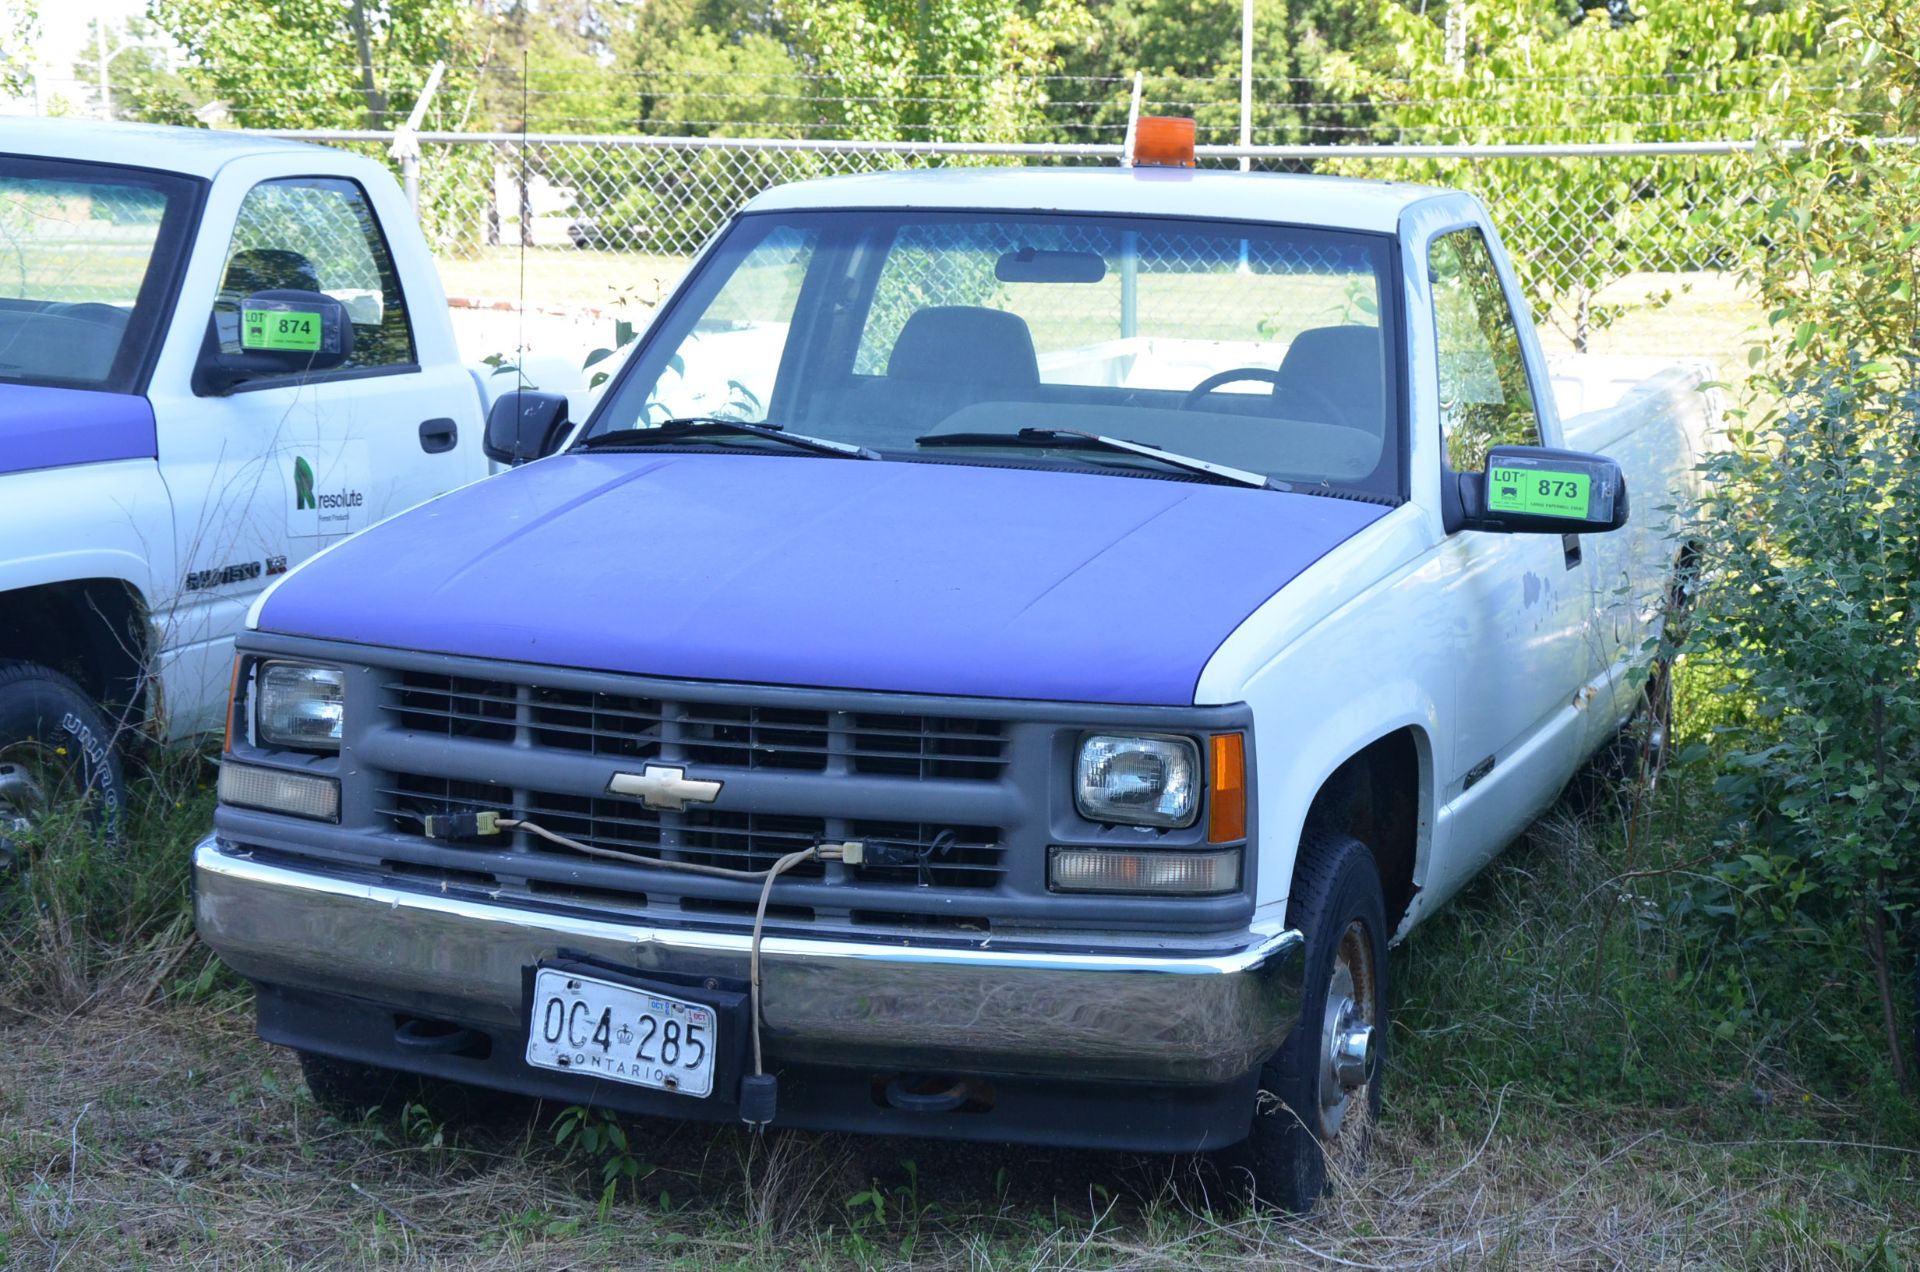 CHEVROLET K1500 REGULAR CAB PICKUP TRUCK, VIN N/A (OFF-ROAD/YARD TRUCK ONLY - NOT PLATED) [RIGGING - Image 2 of 3